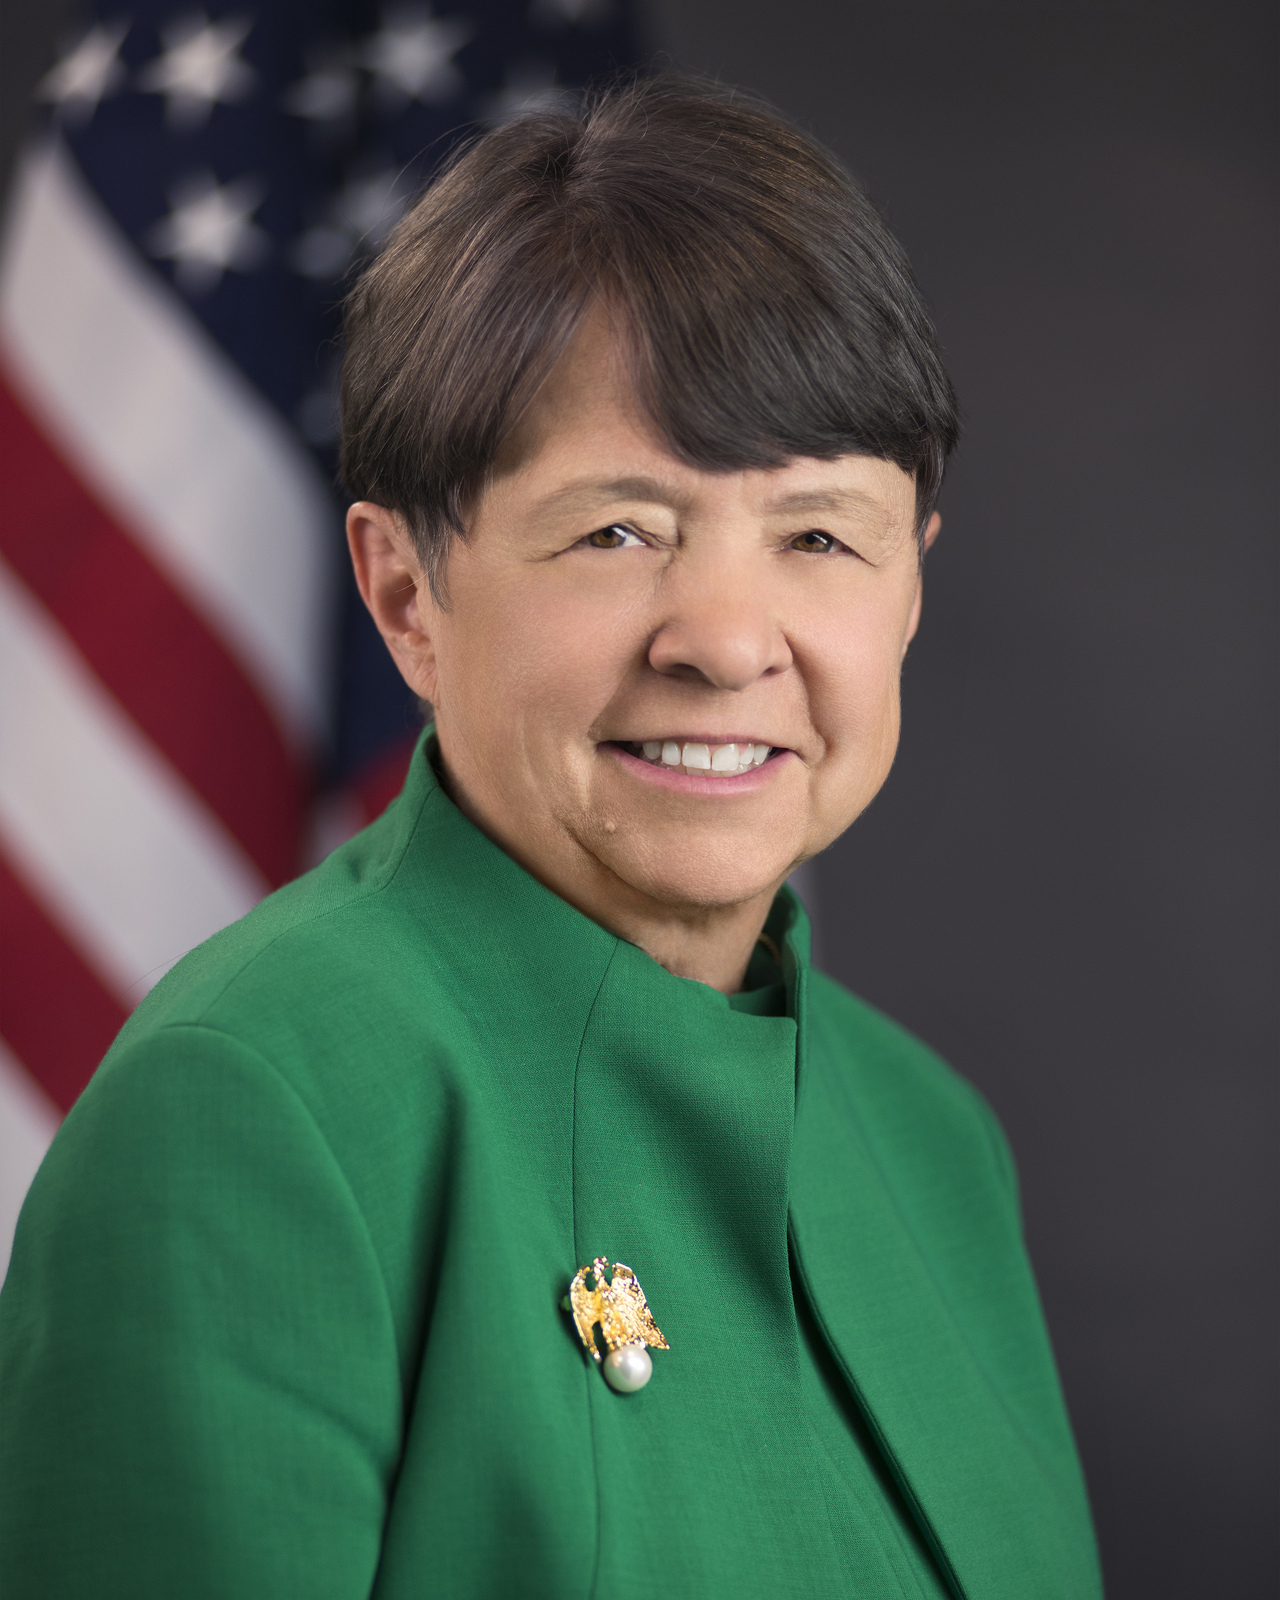 Securities and Exchange Commission Chair Mary Jo White